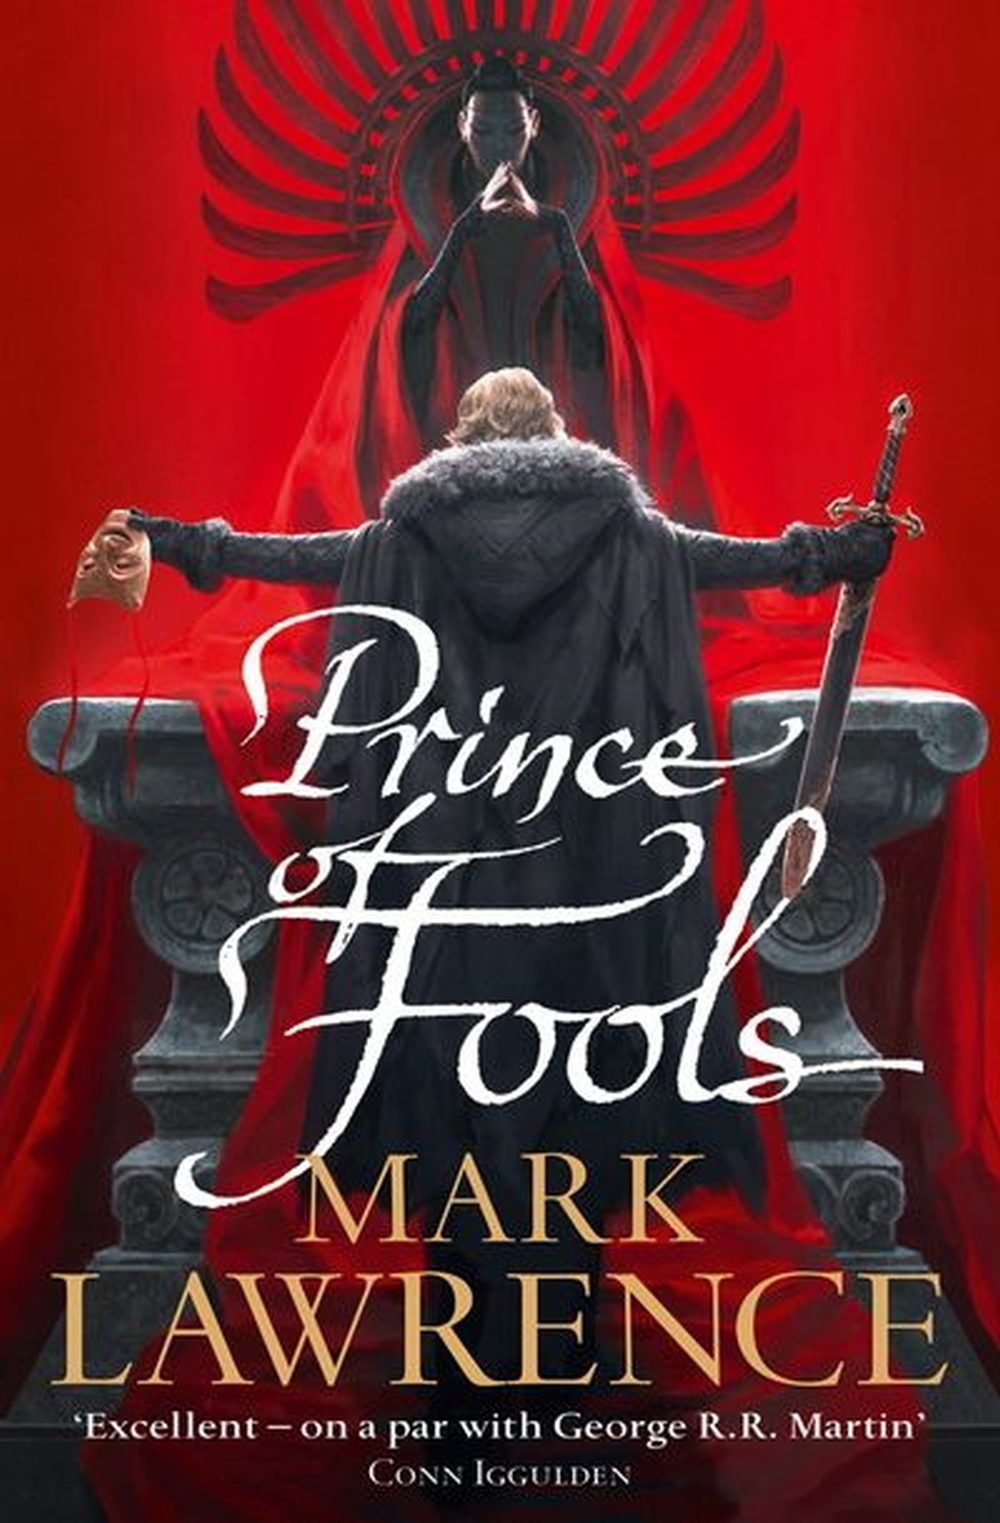 Cover des Buches "Prince of Fools" von Mark Lawrence